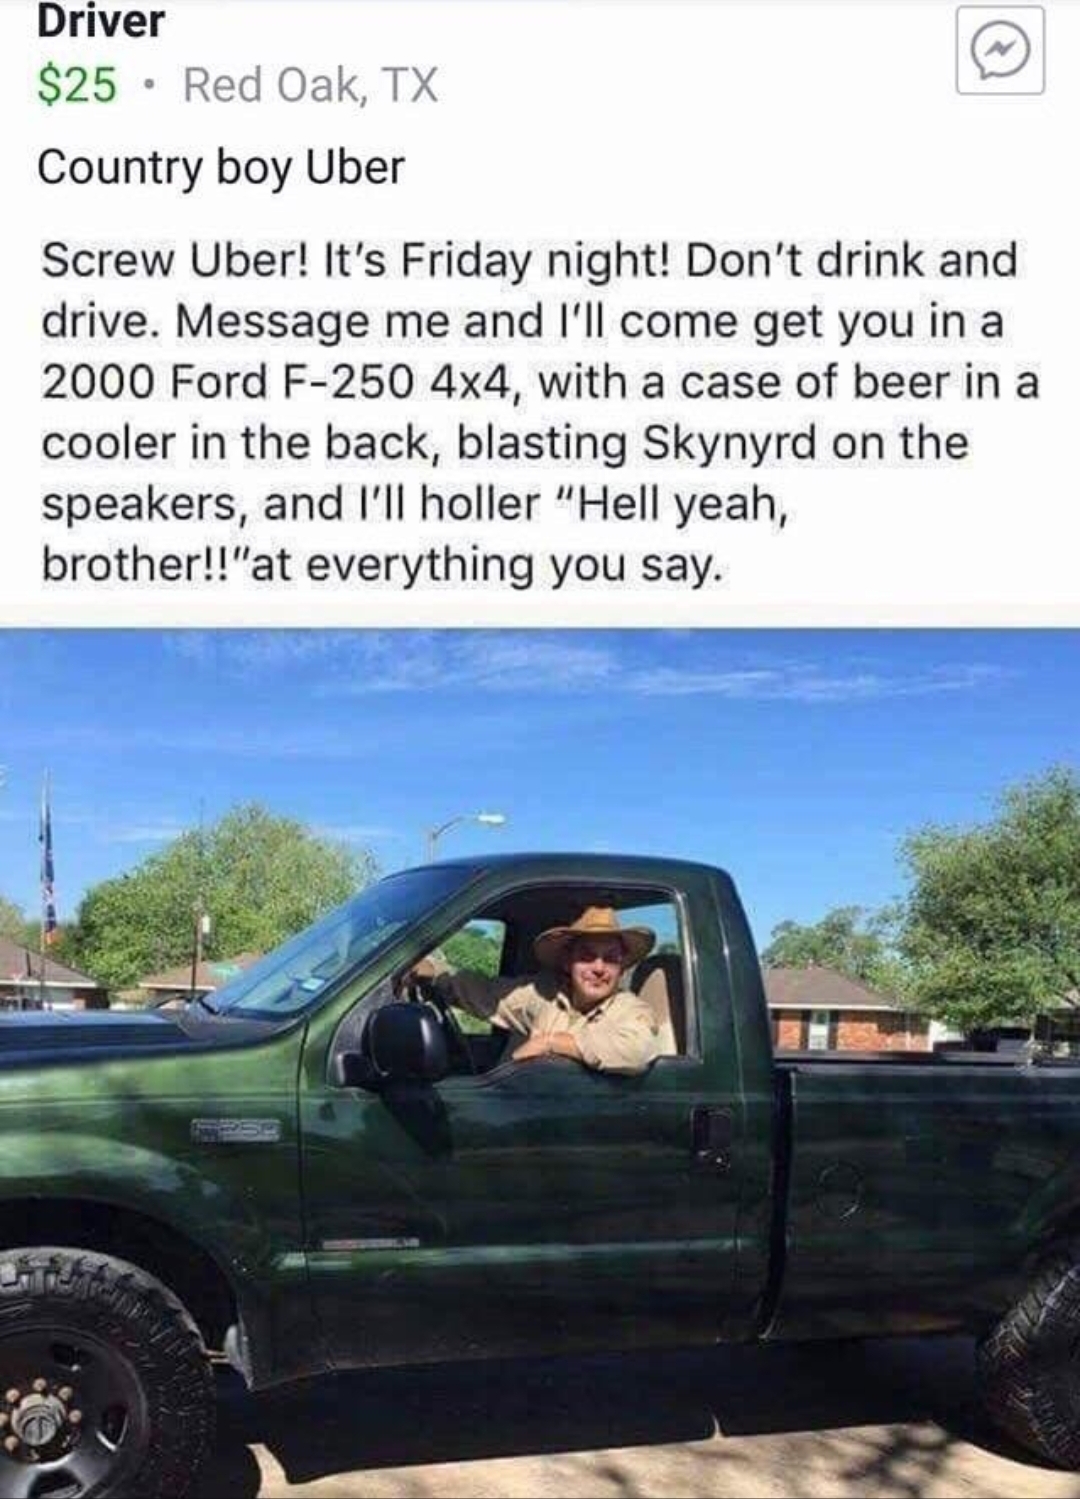 hell yeah brother uber - Driver $25. Red Oak, Tx Country boy Uber Screw Uber! It's Friday night! Don't drink and drive. Message me and I'll come get you in a 2000 Ford F250 4x4, with a case of beer in a cooler in the back, blasting Skynyrd on the speakers